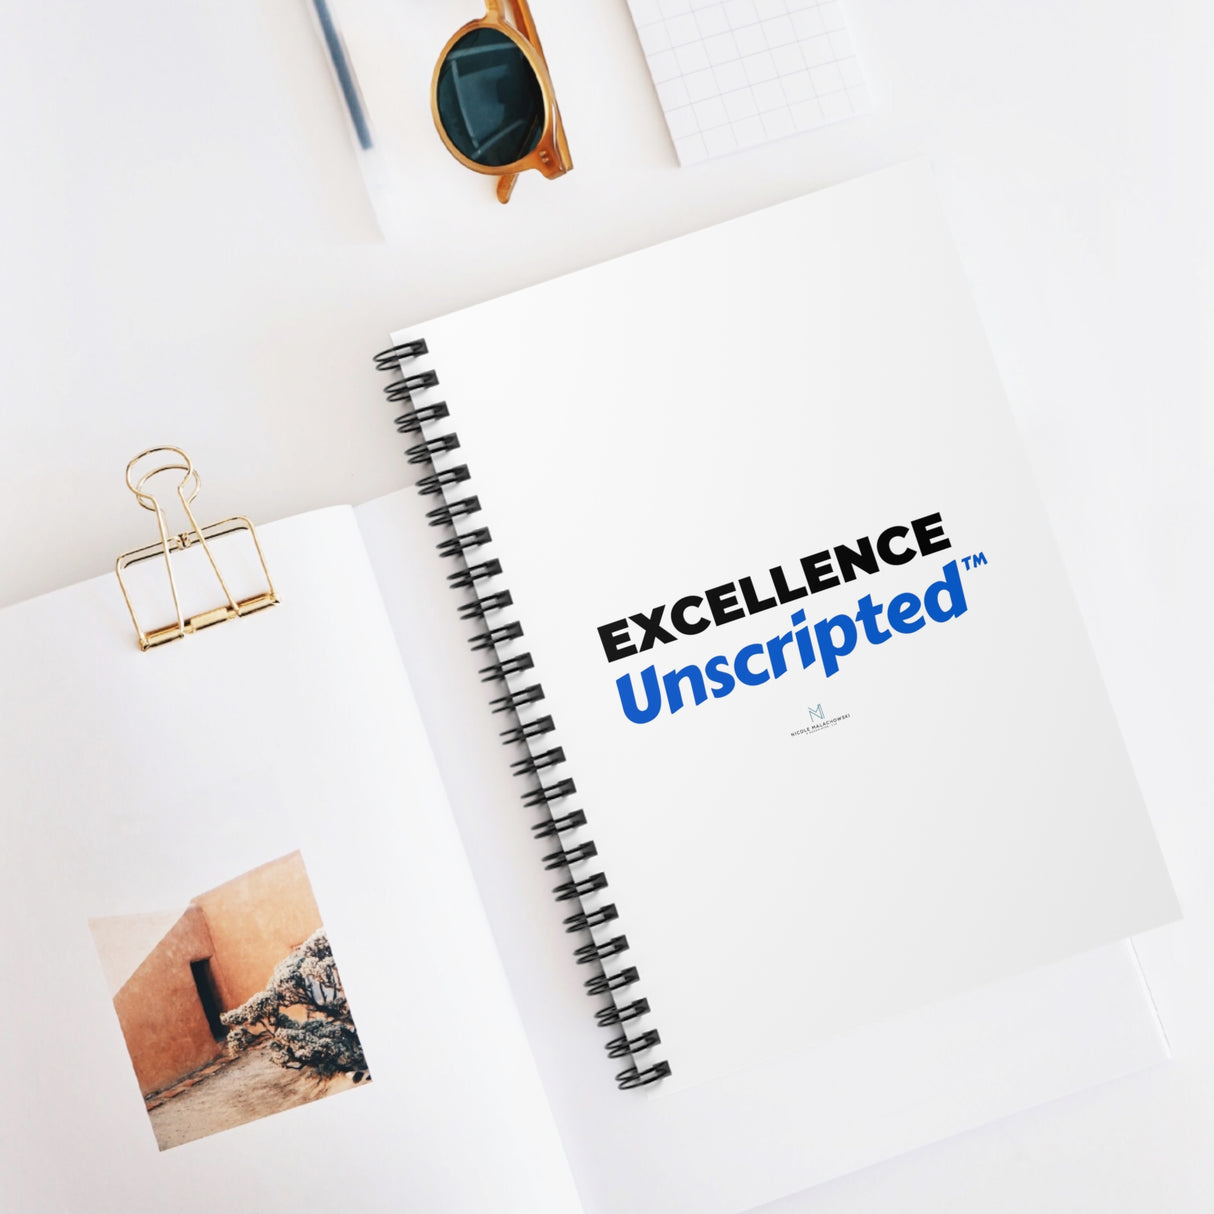 "Excellence Unscripted" Spiral Notebook